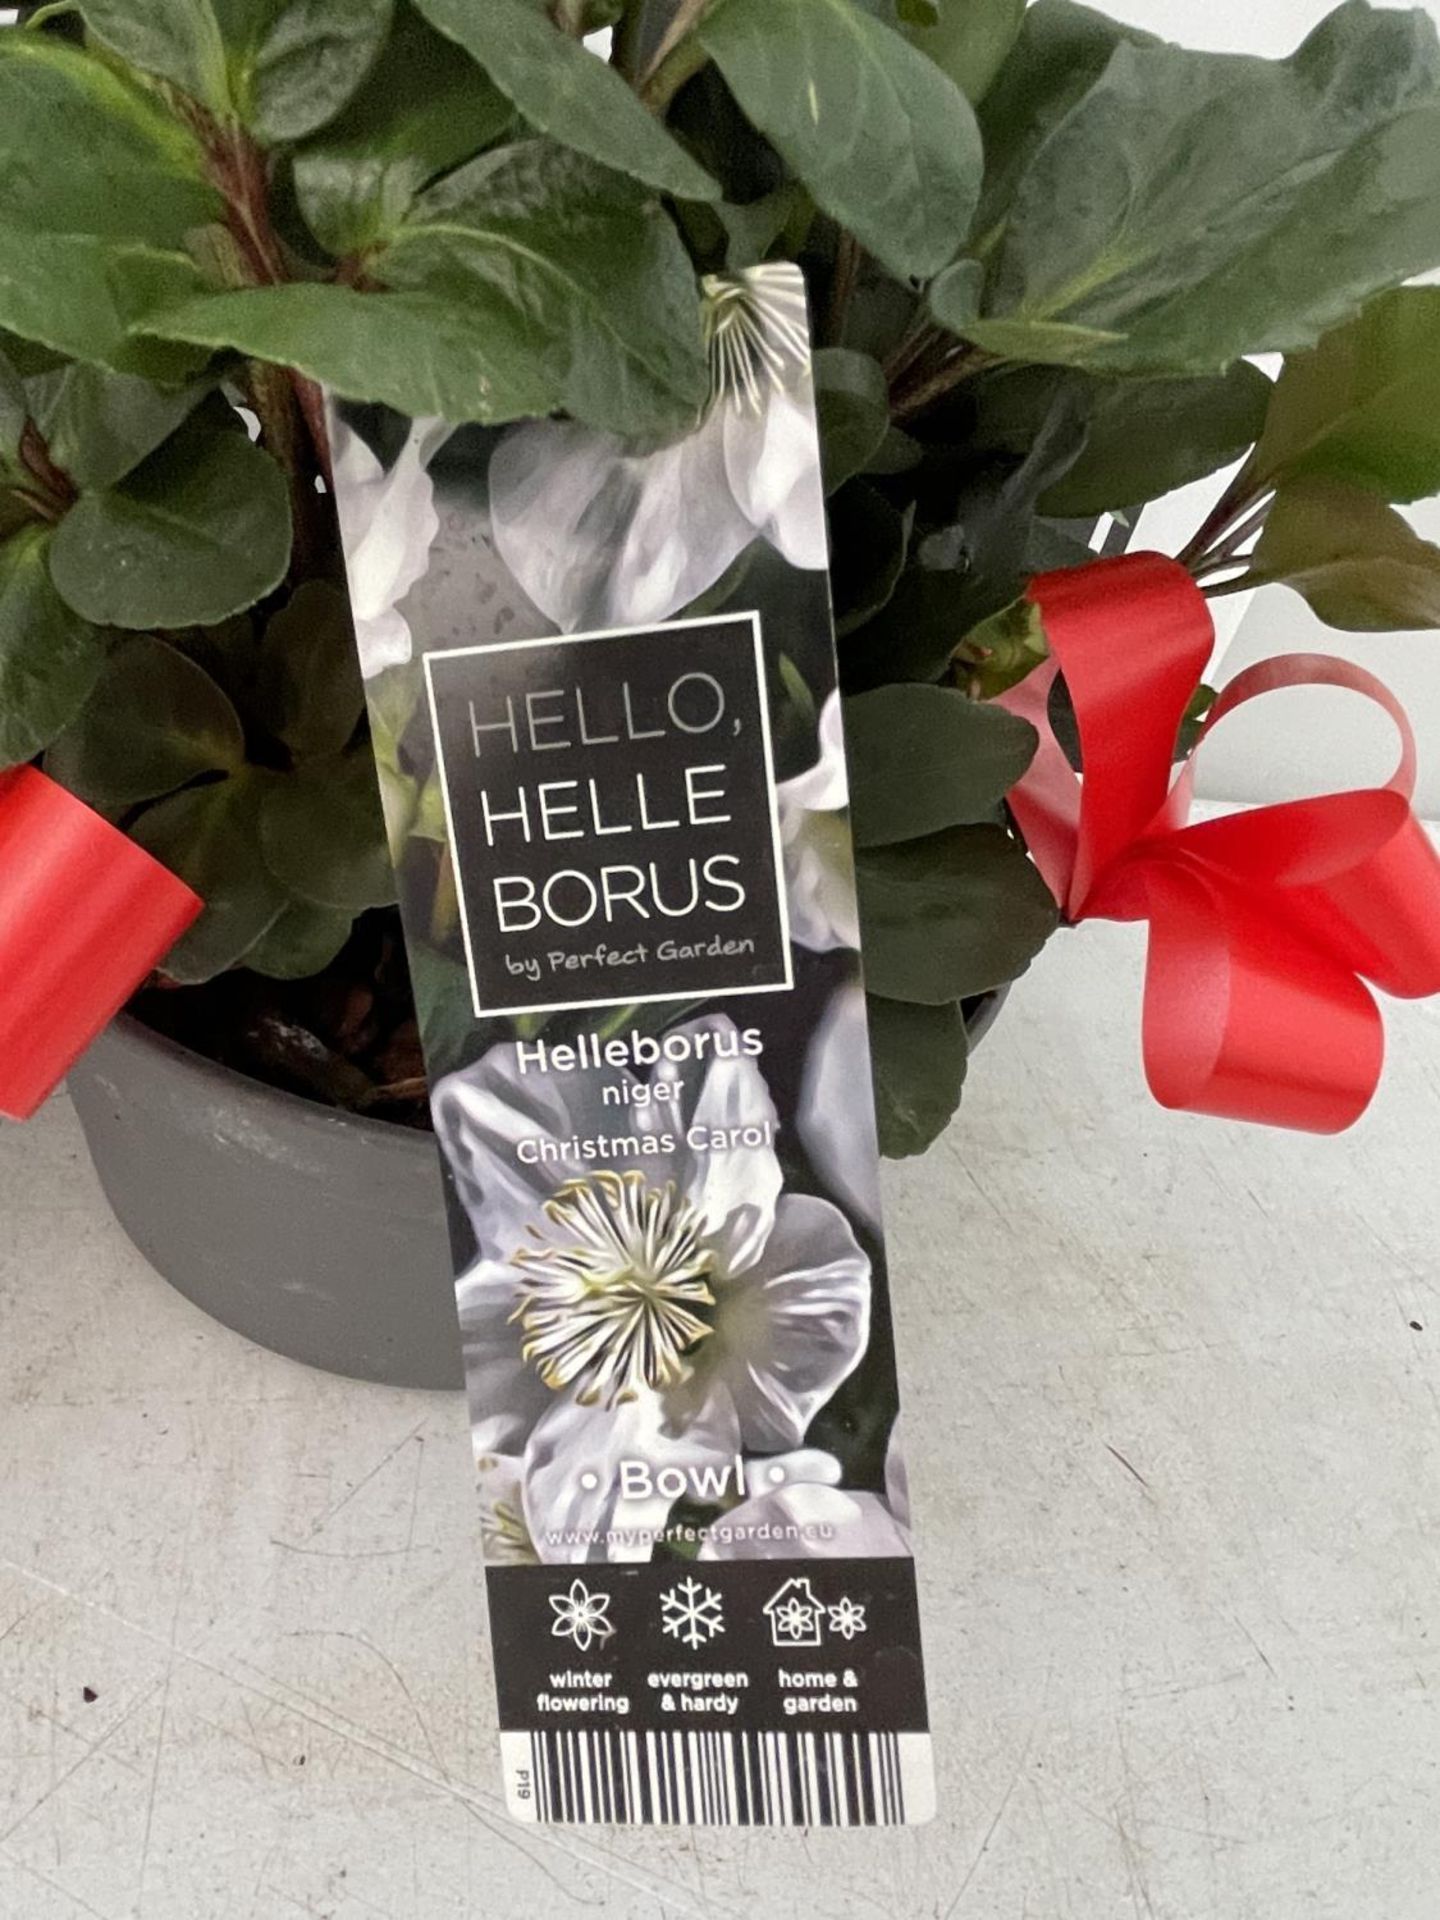 TWO HELLEBOROUS WHITE NIGER CHRISTMAS CAROL IN A 3 LTR BOWL + VAT TO BE SOLD FOR THE TWO - Image 8 of 8